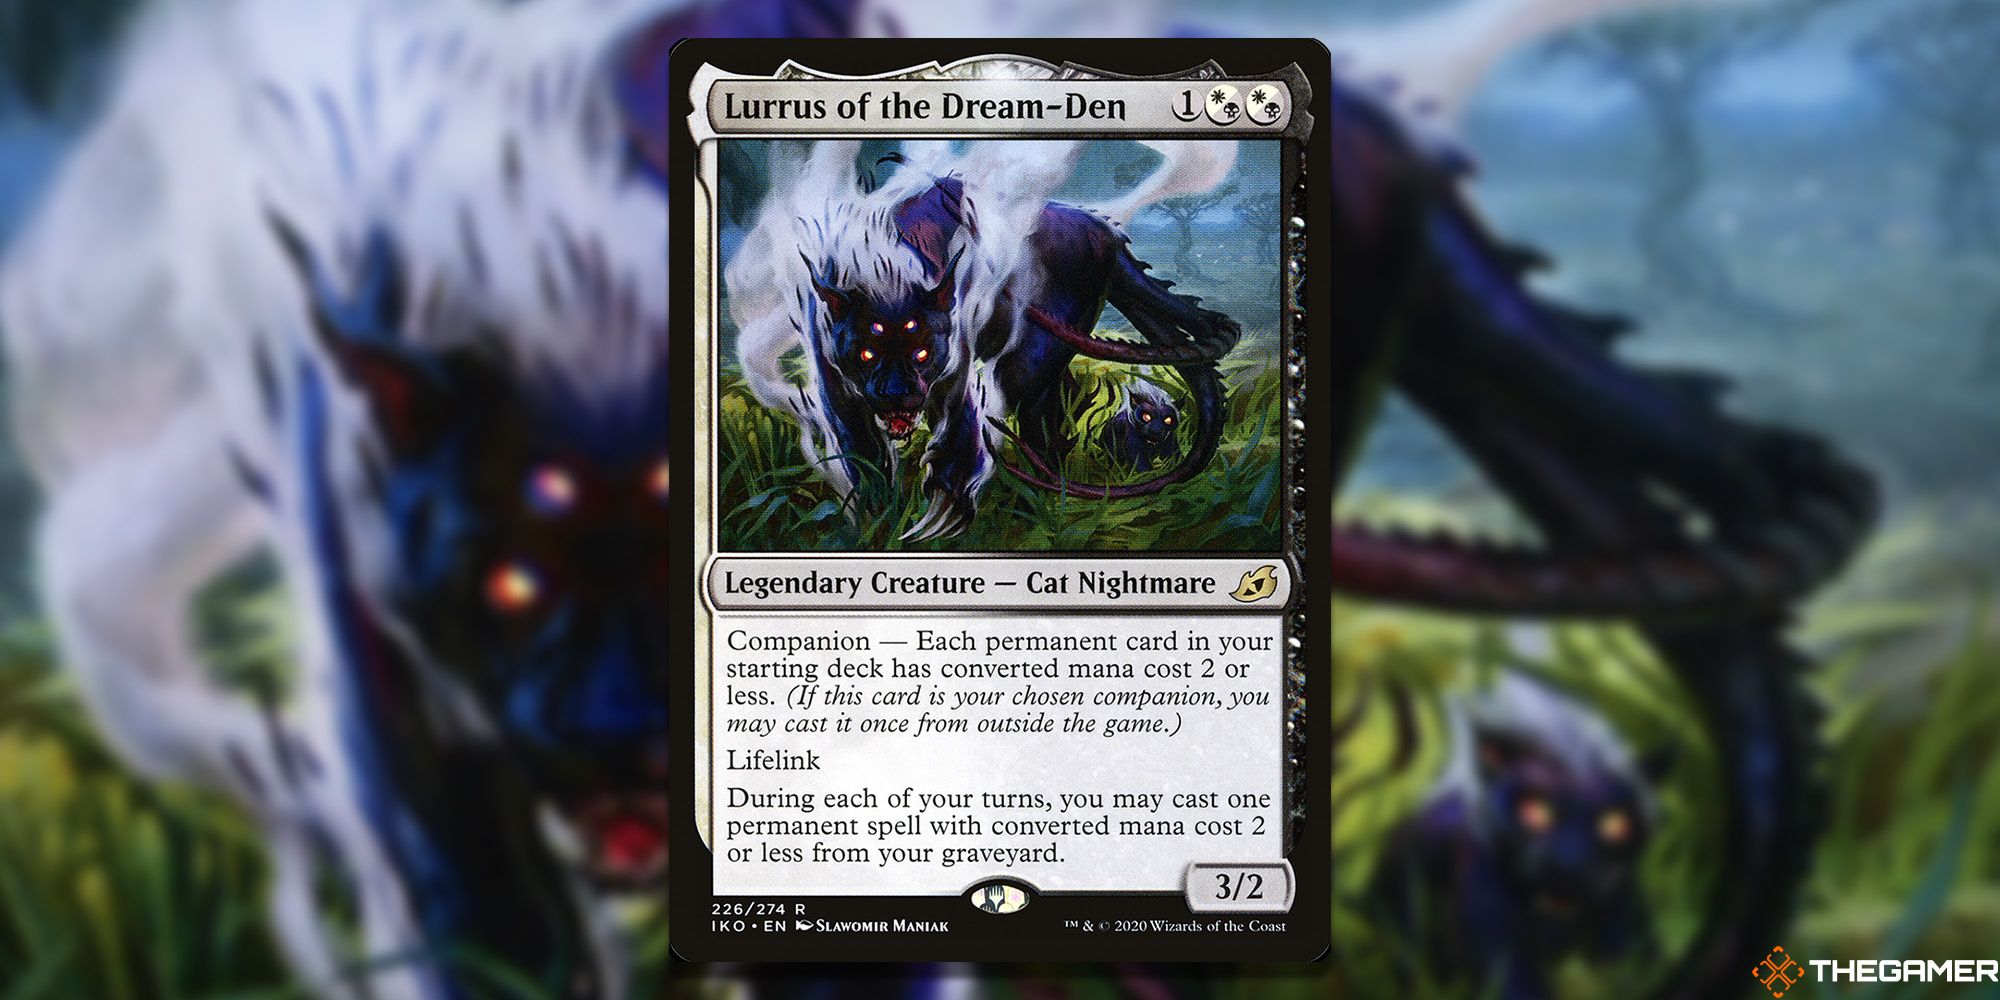 Lurrus Of The Dream-Den full card and art background